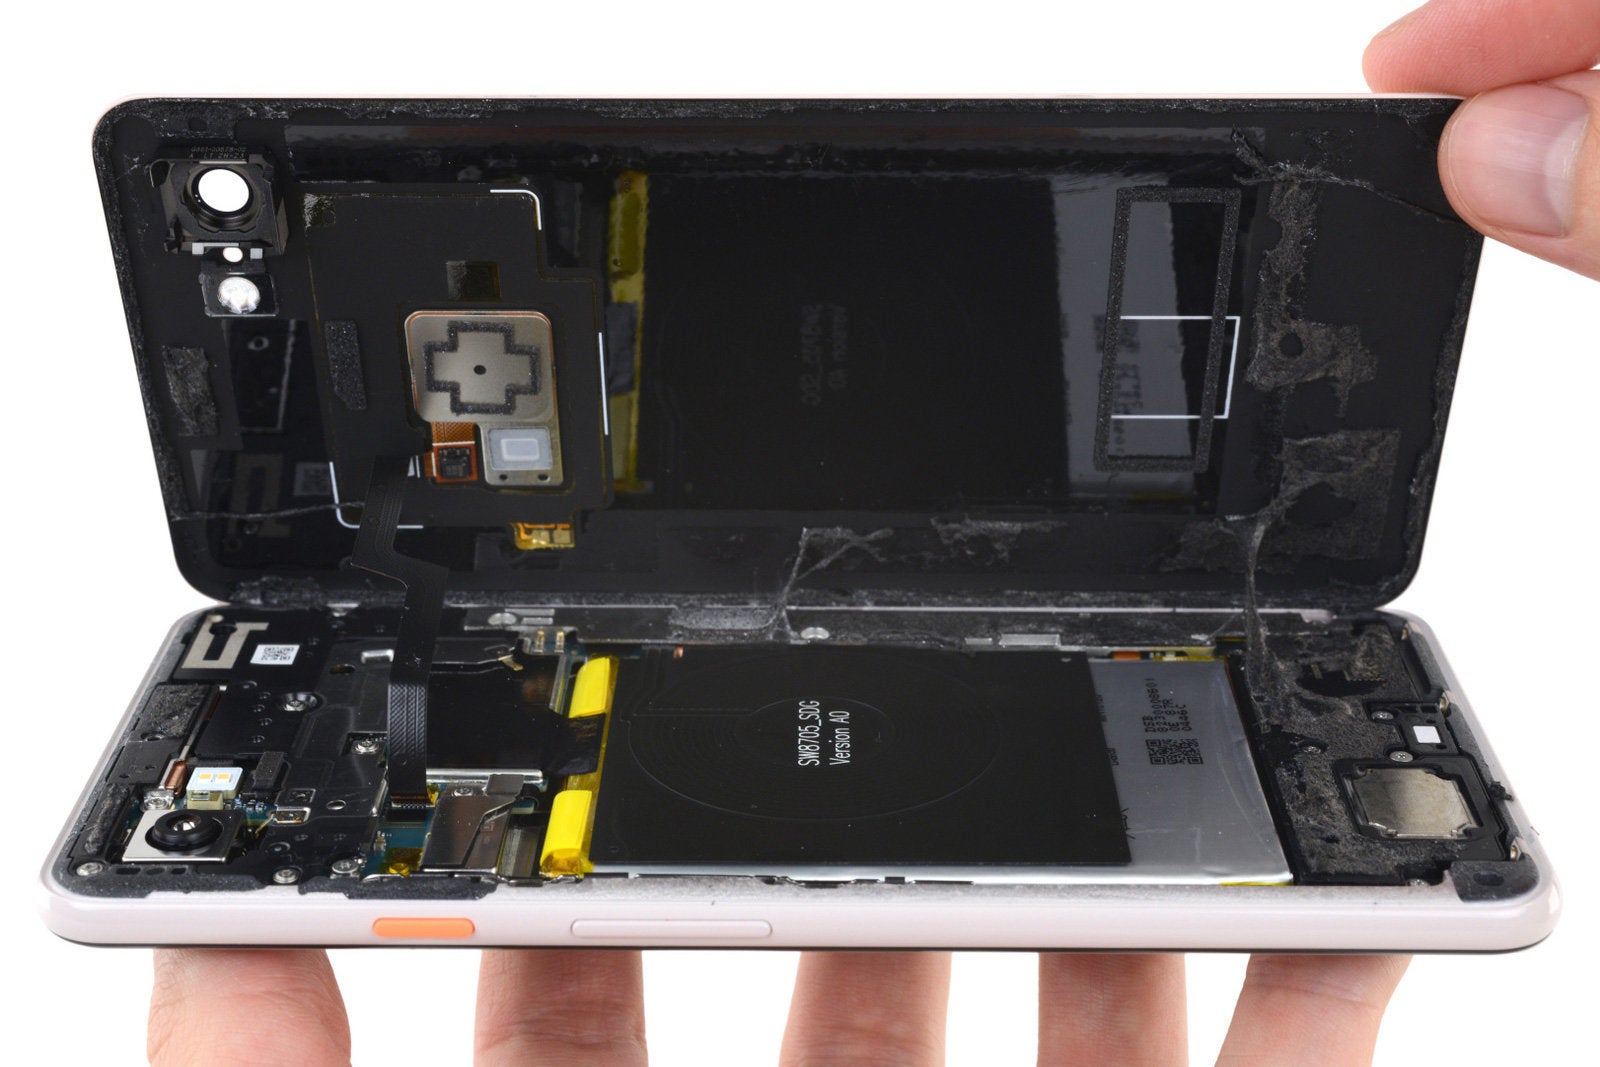 Pixel 3 XL disassembly by iFixit - Google is not a hardware company, where does that leave the Pixels?